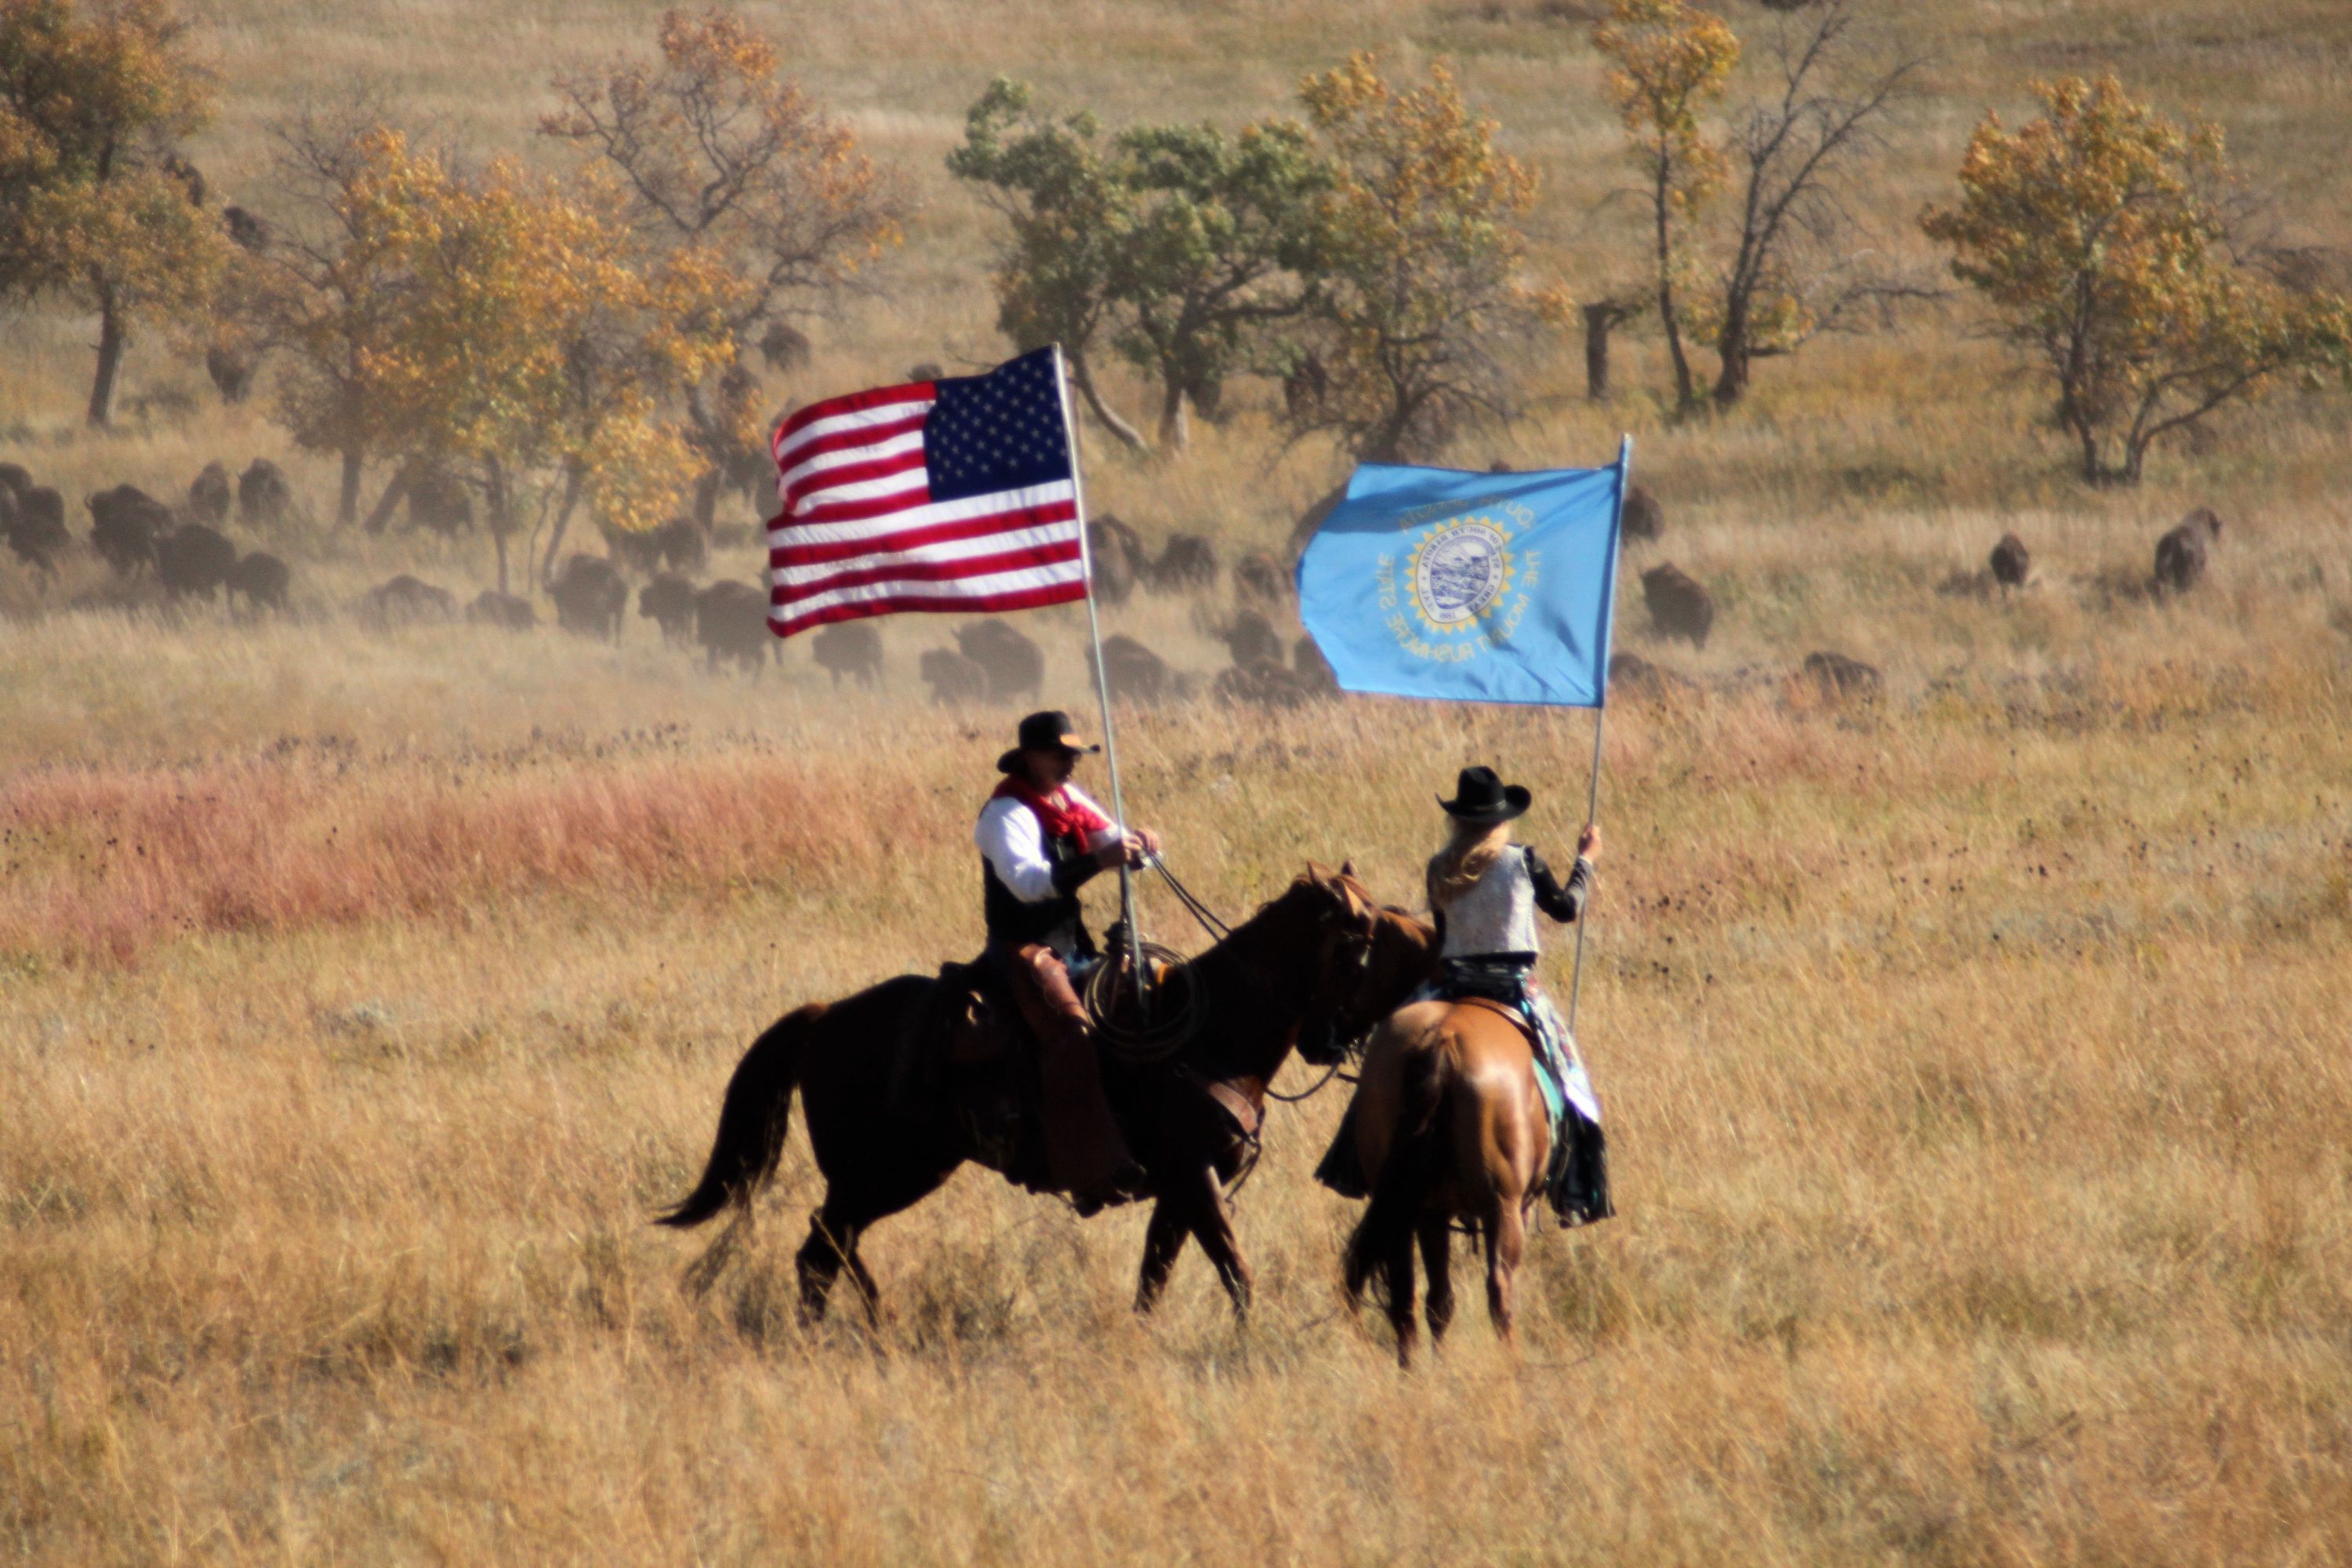 Tim Giago: South Dakota still doesn't get it when it comes to tribes and bison